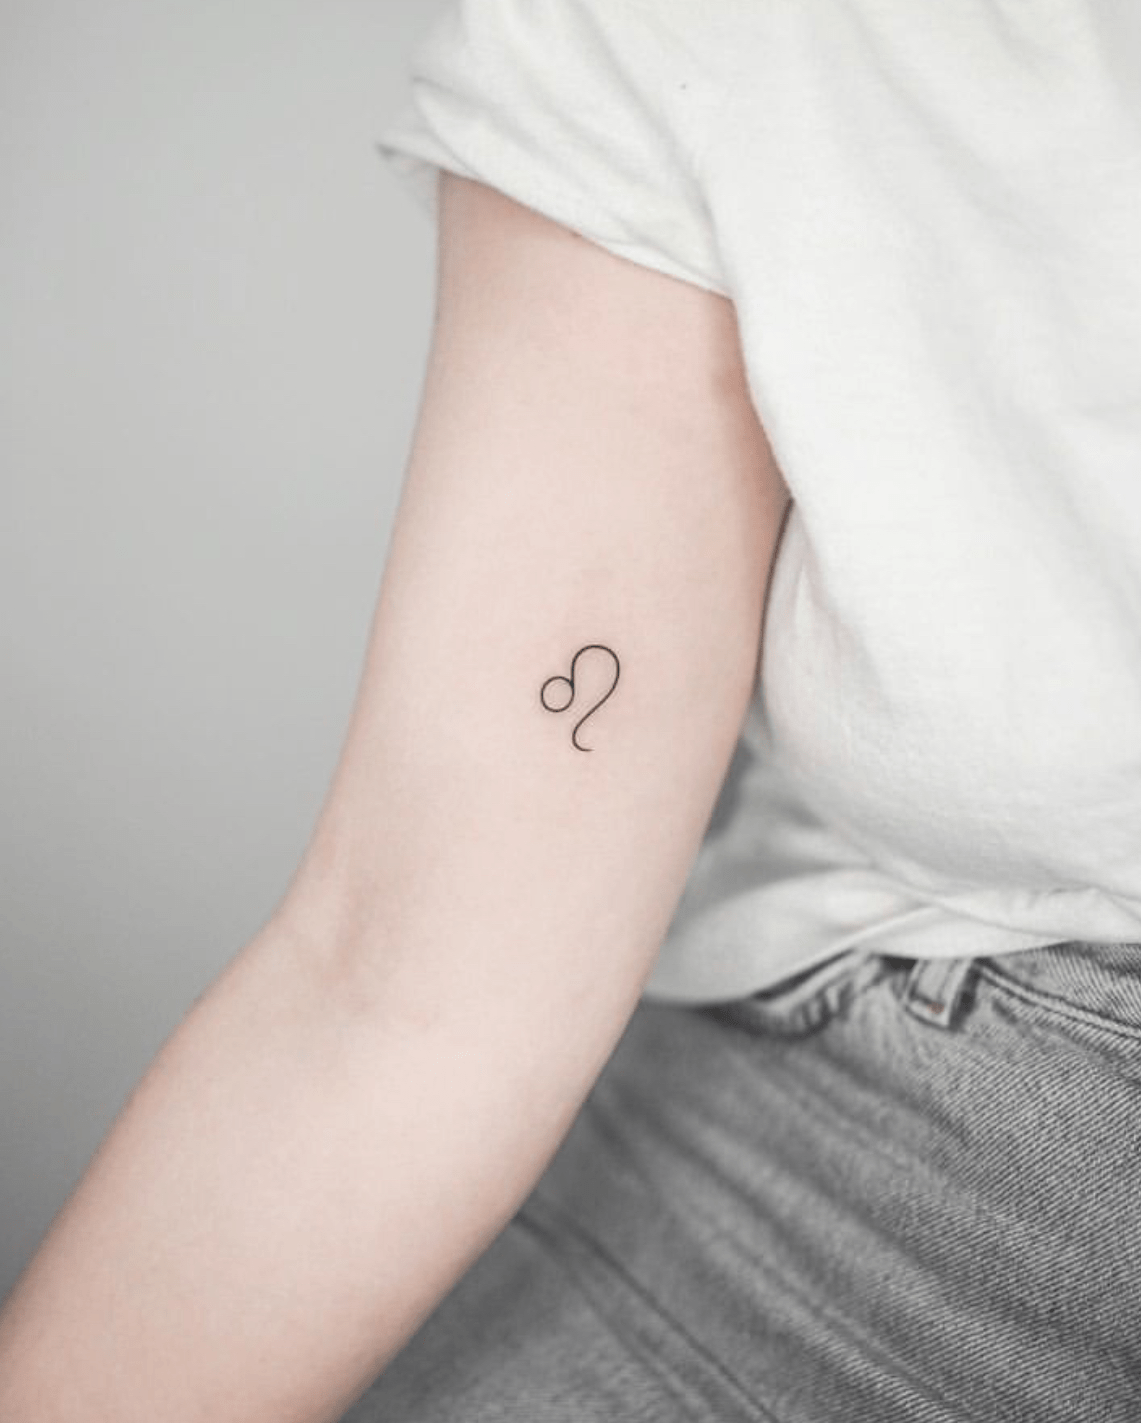 Tattoos with the zodiac sign Leo - photo and meaning - All about tattoo